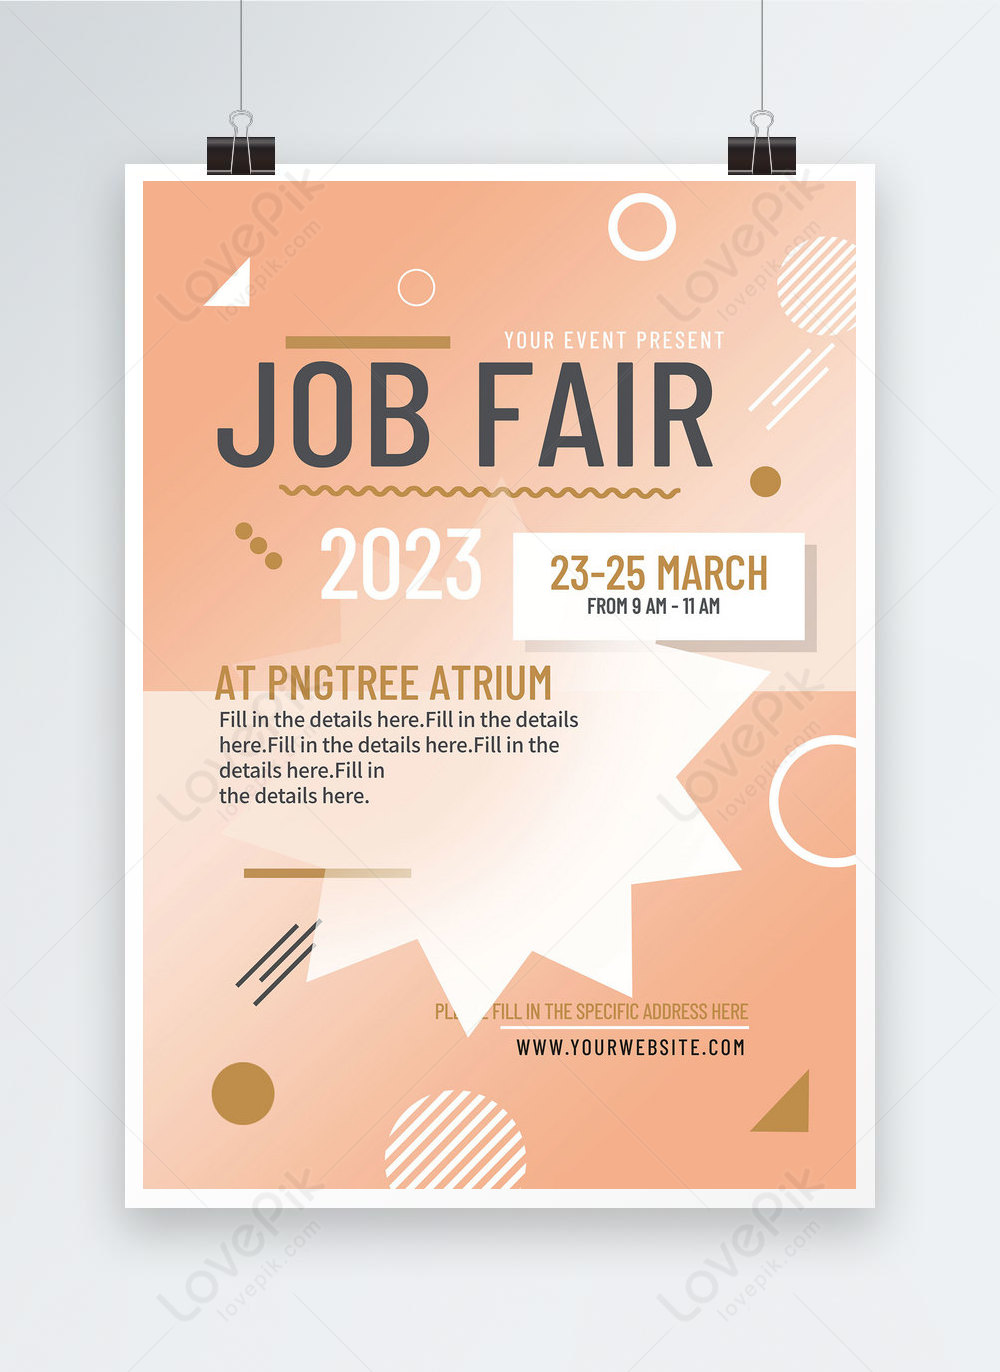 Job fair flyer template image_picture free download Pertaining To Job Fair Flyer Template